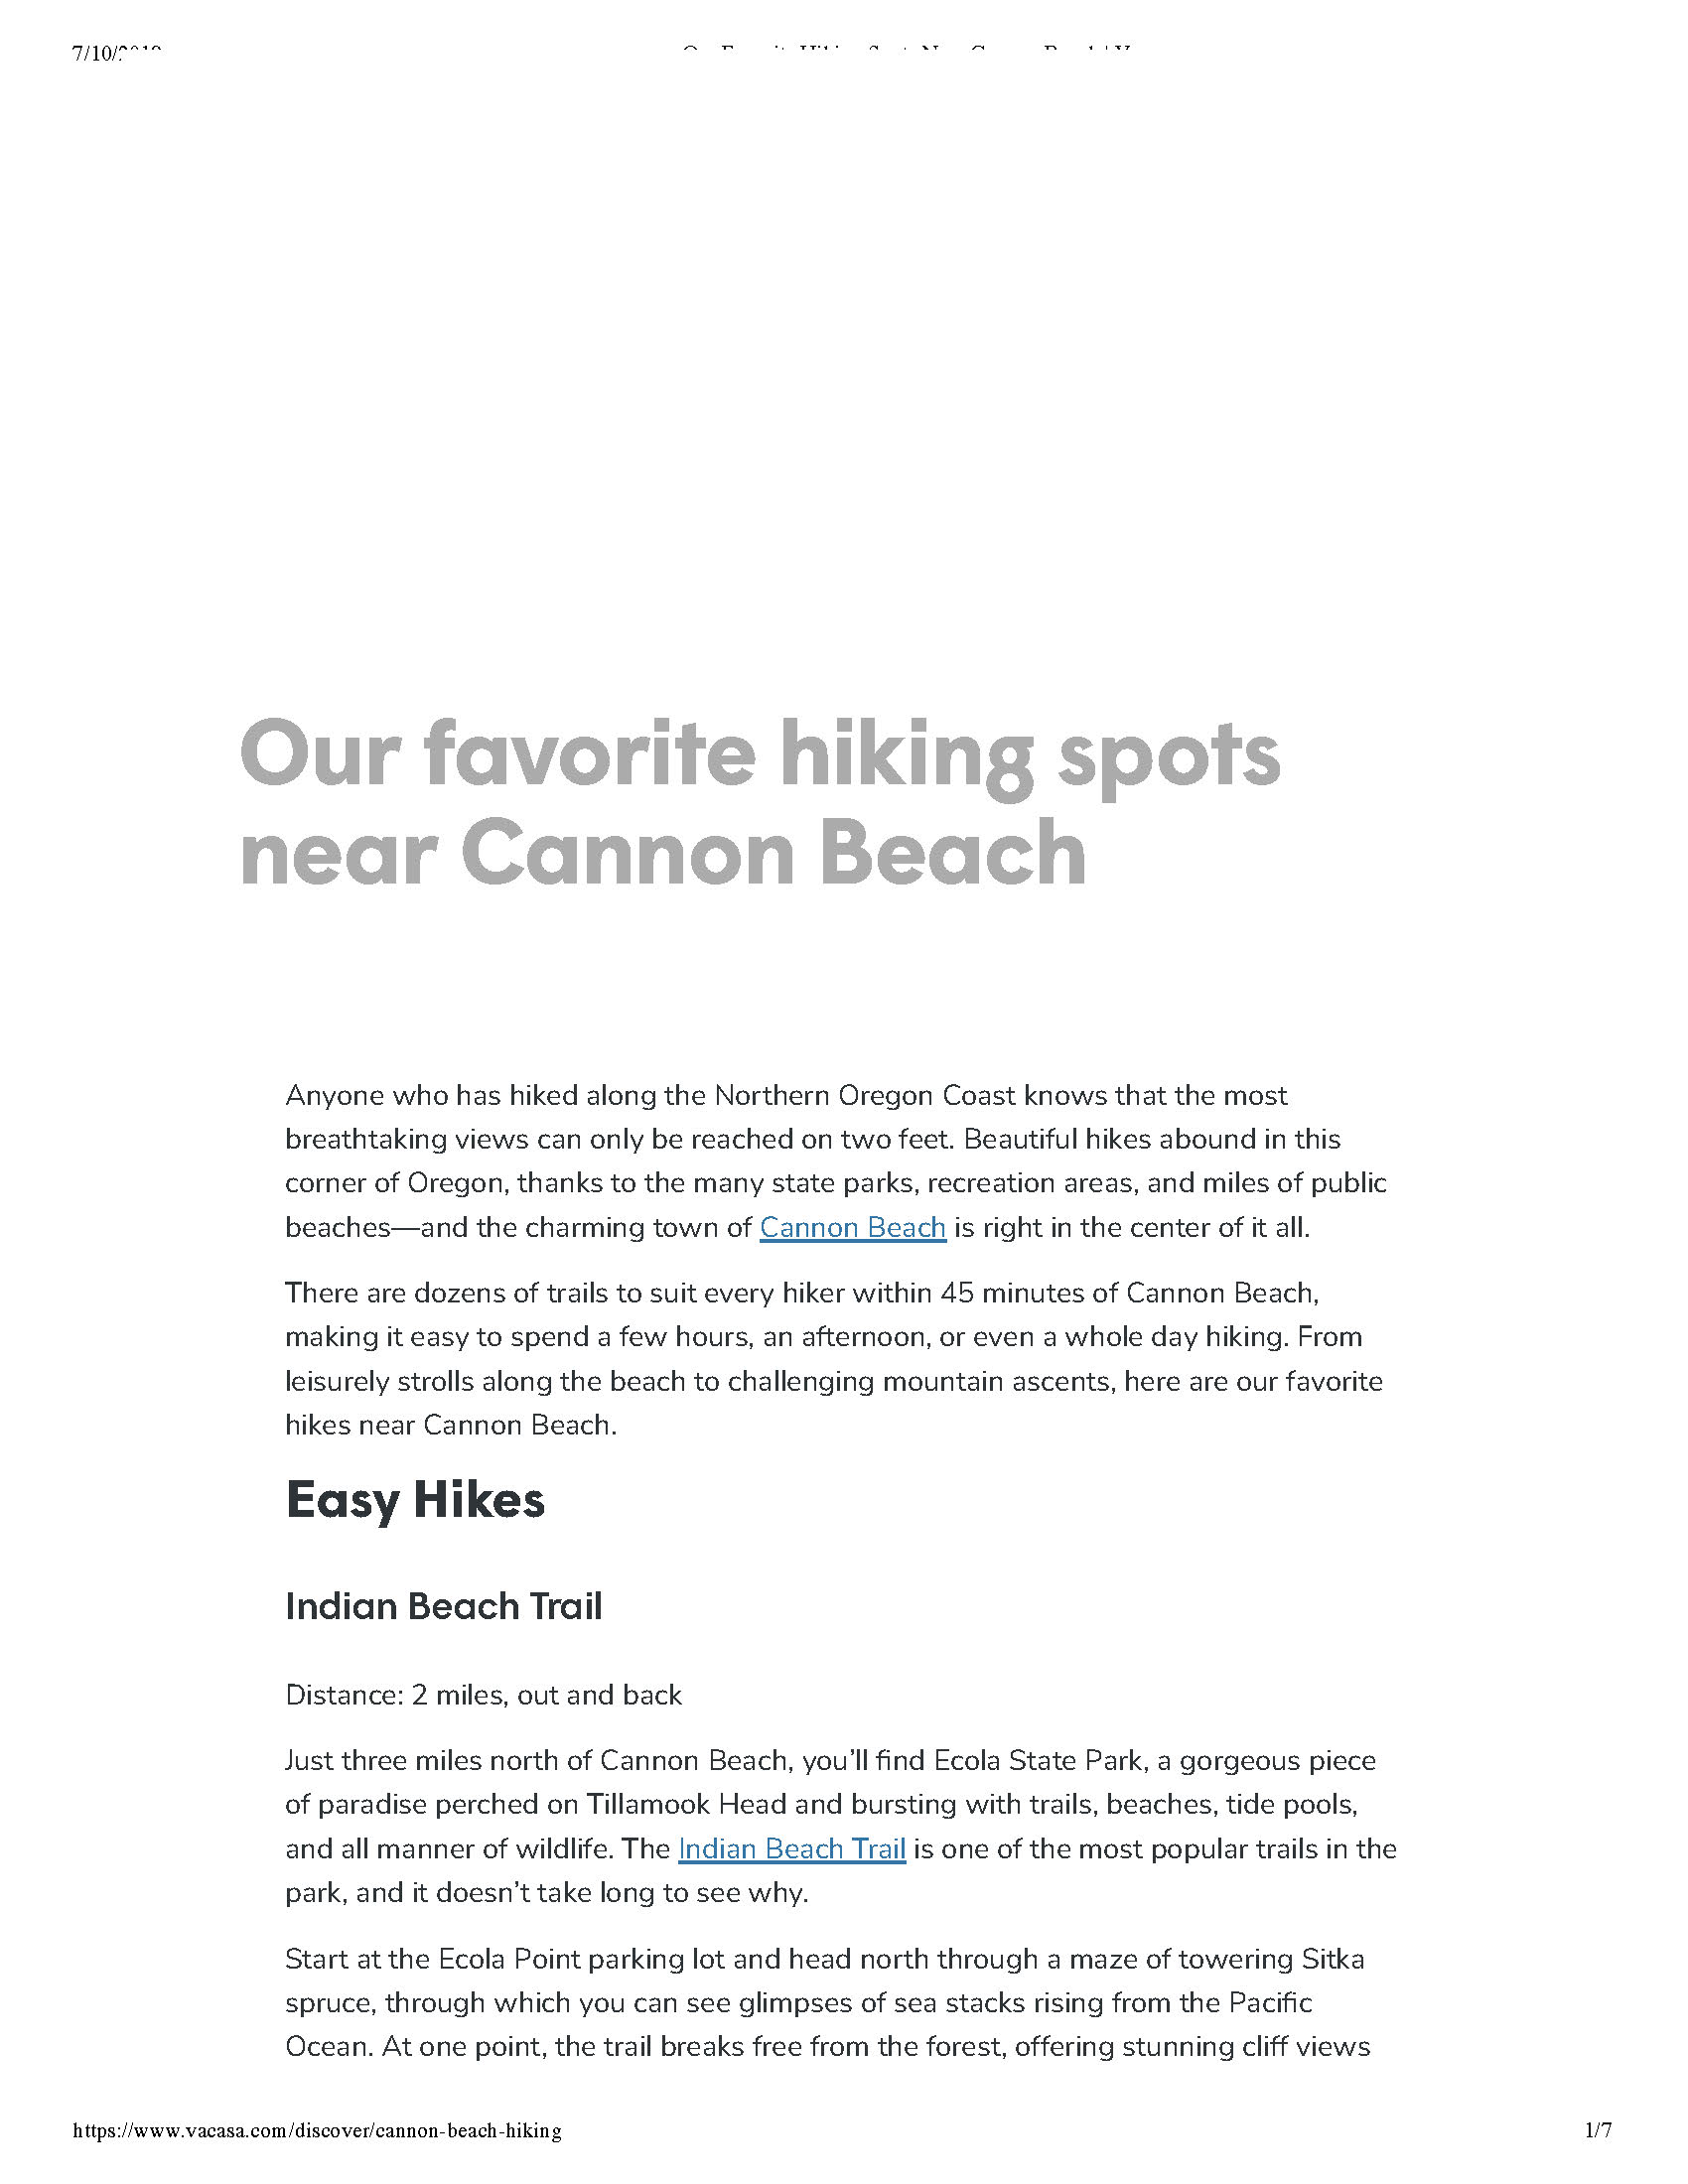 Blog Post: Our favorite hiking spots near Cannon Beach